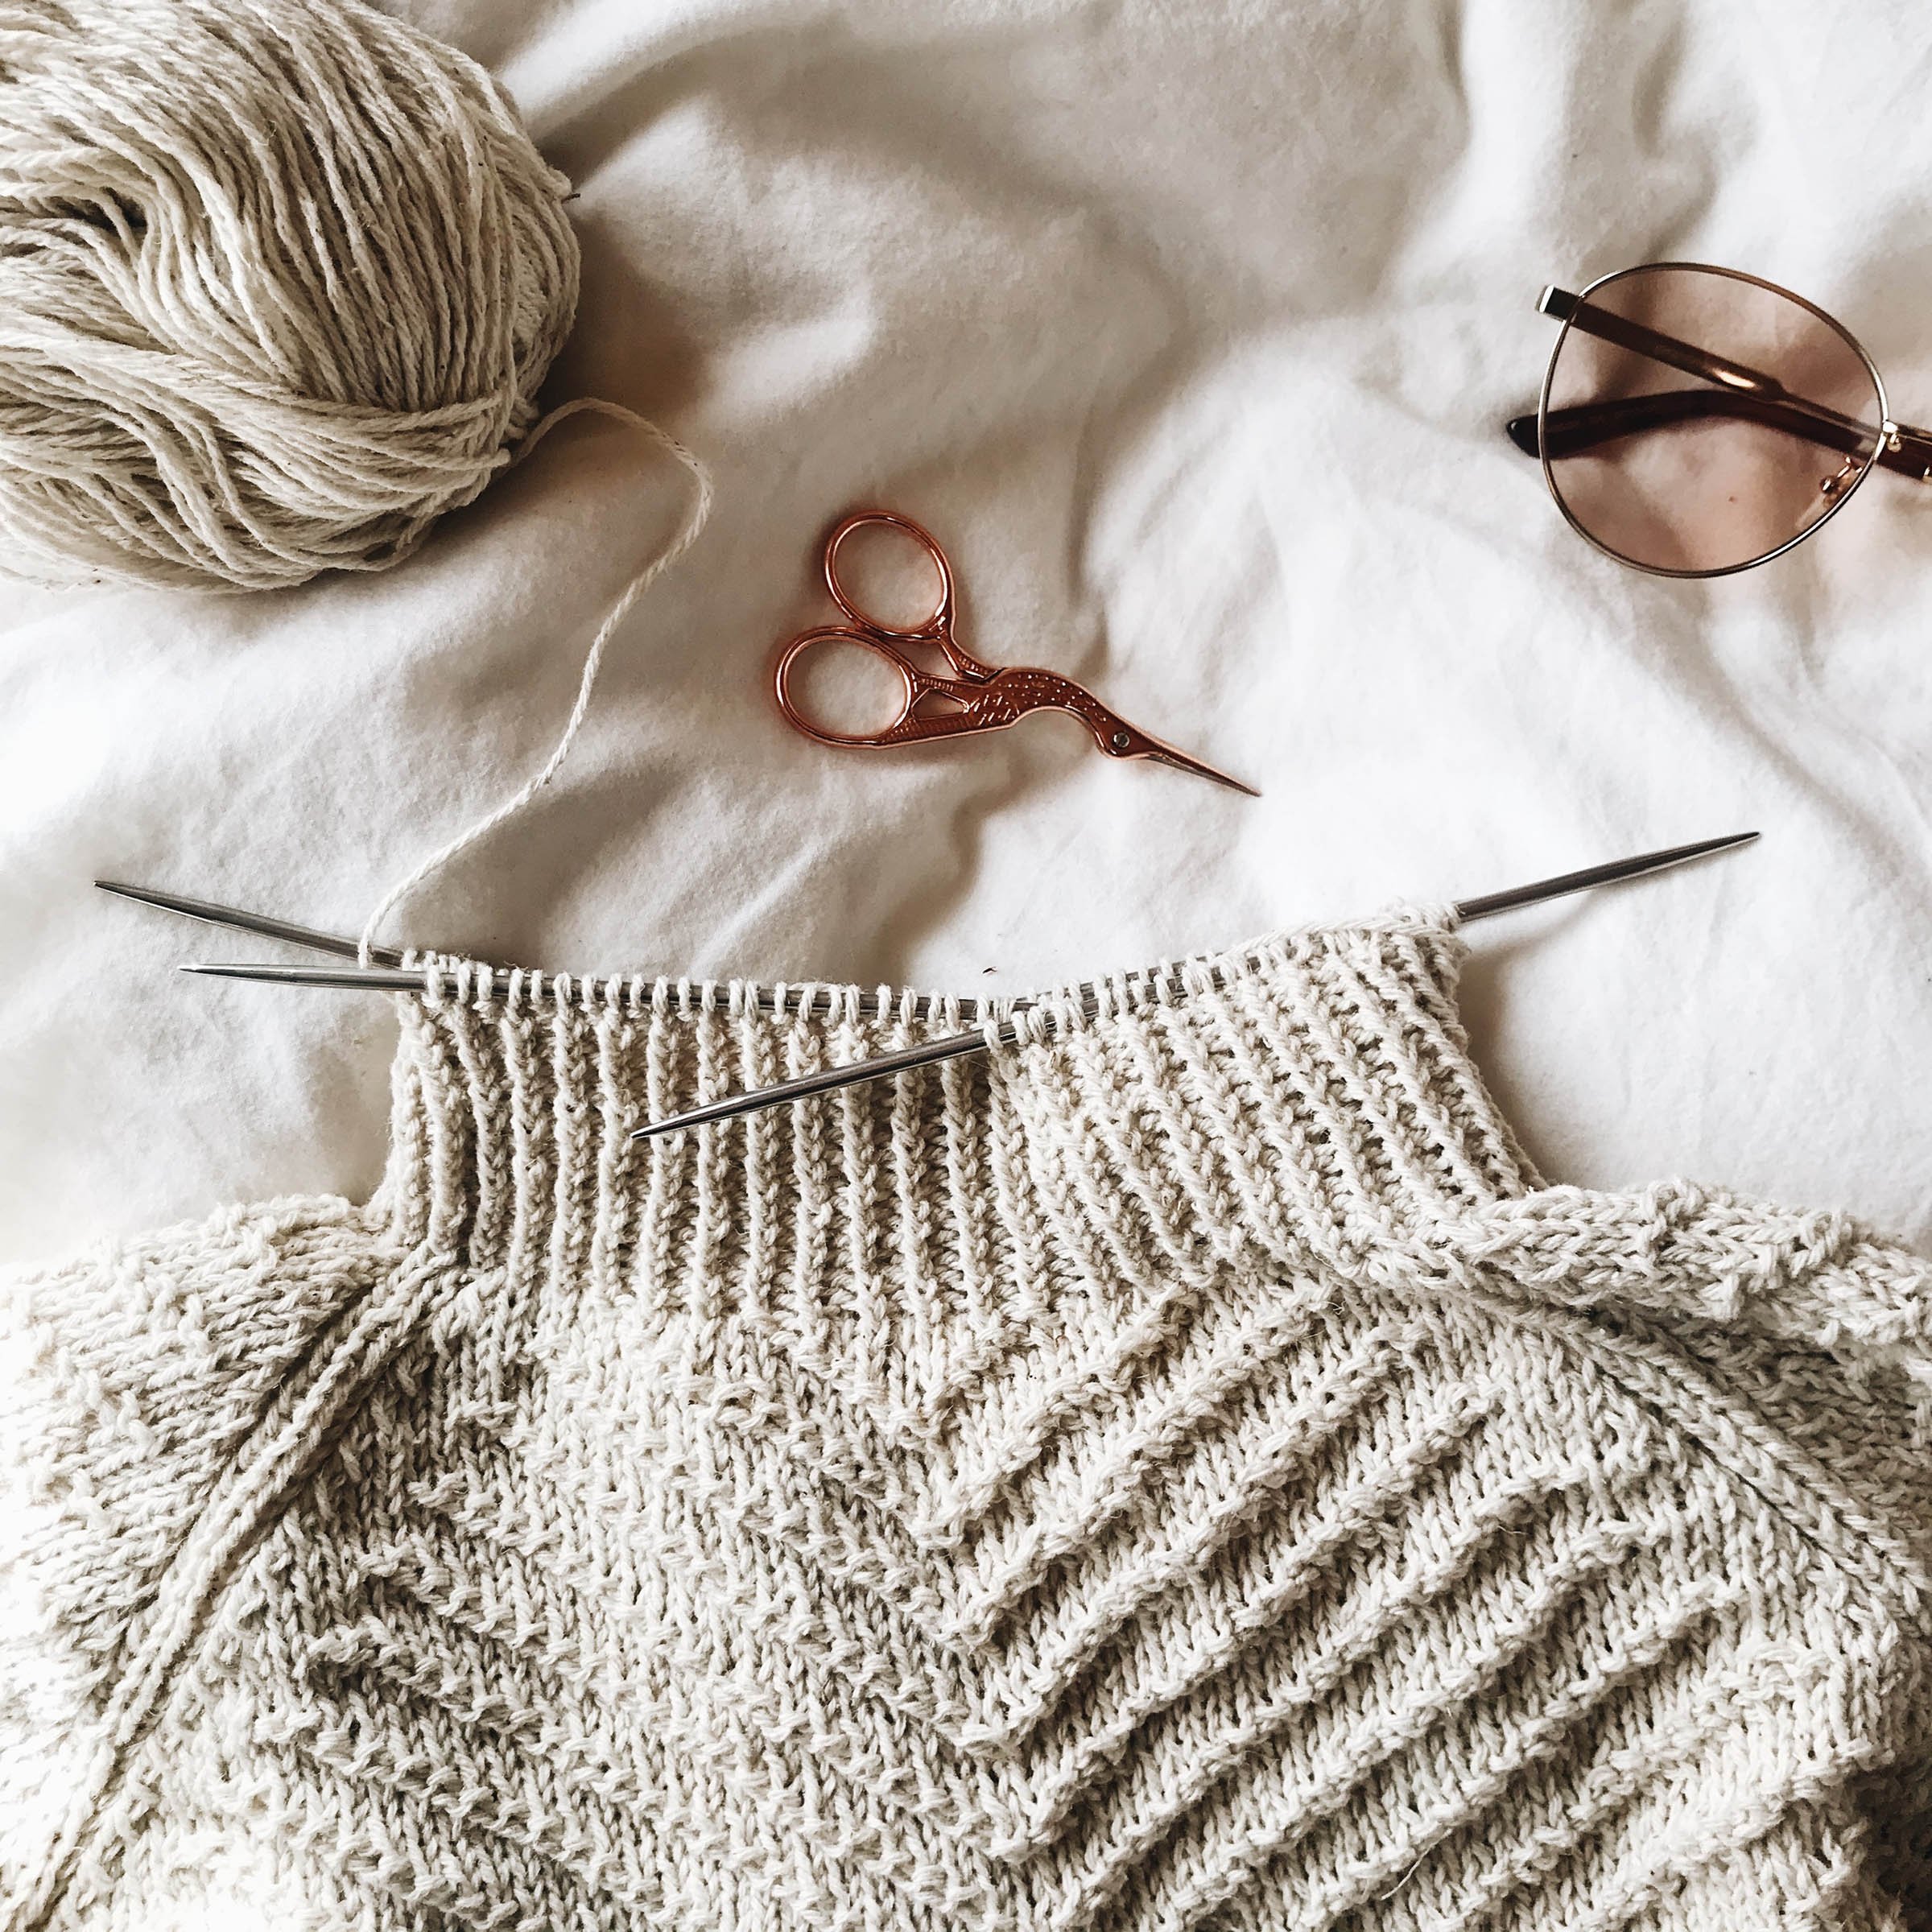 Knitting in the round with Double Pointed Needles